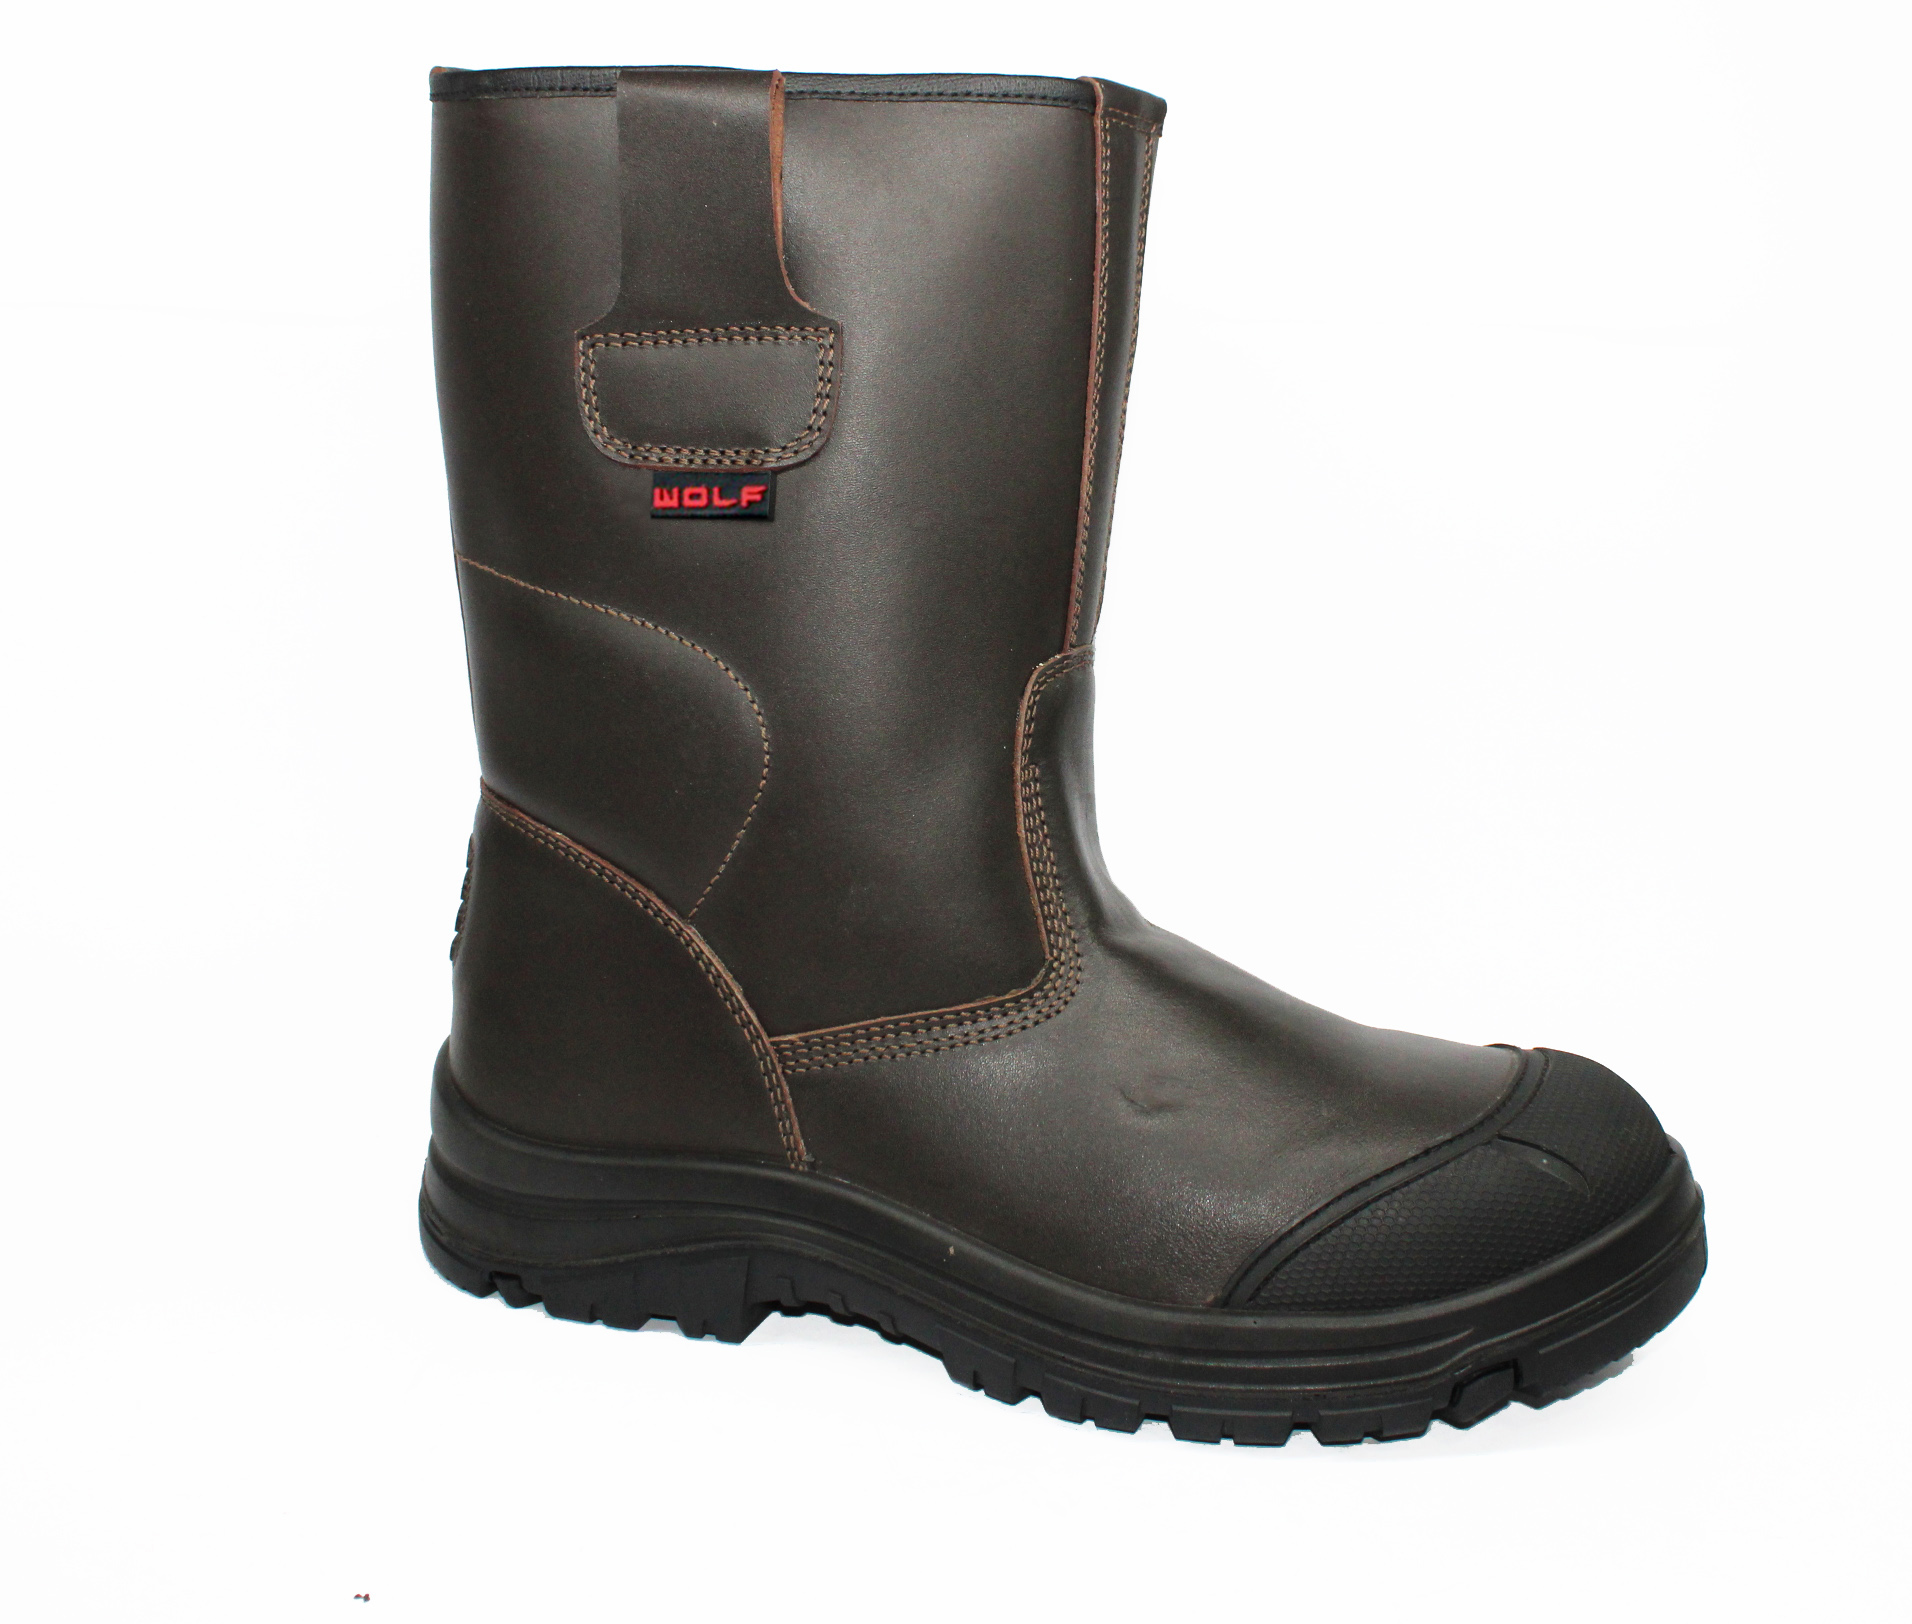 Double Density PU/Rubber Safety Rigger Boot